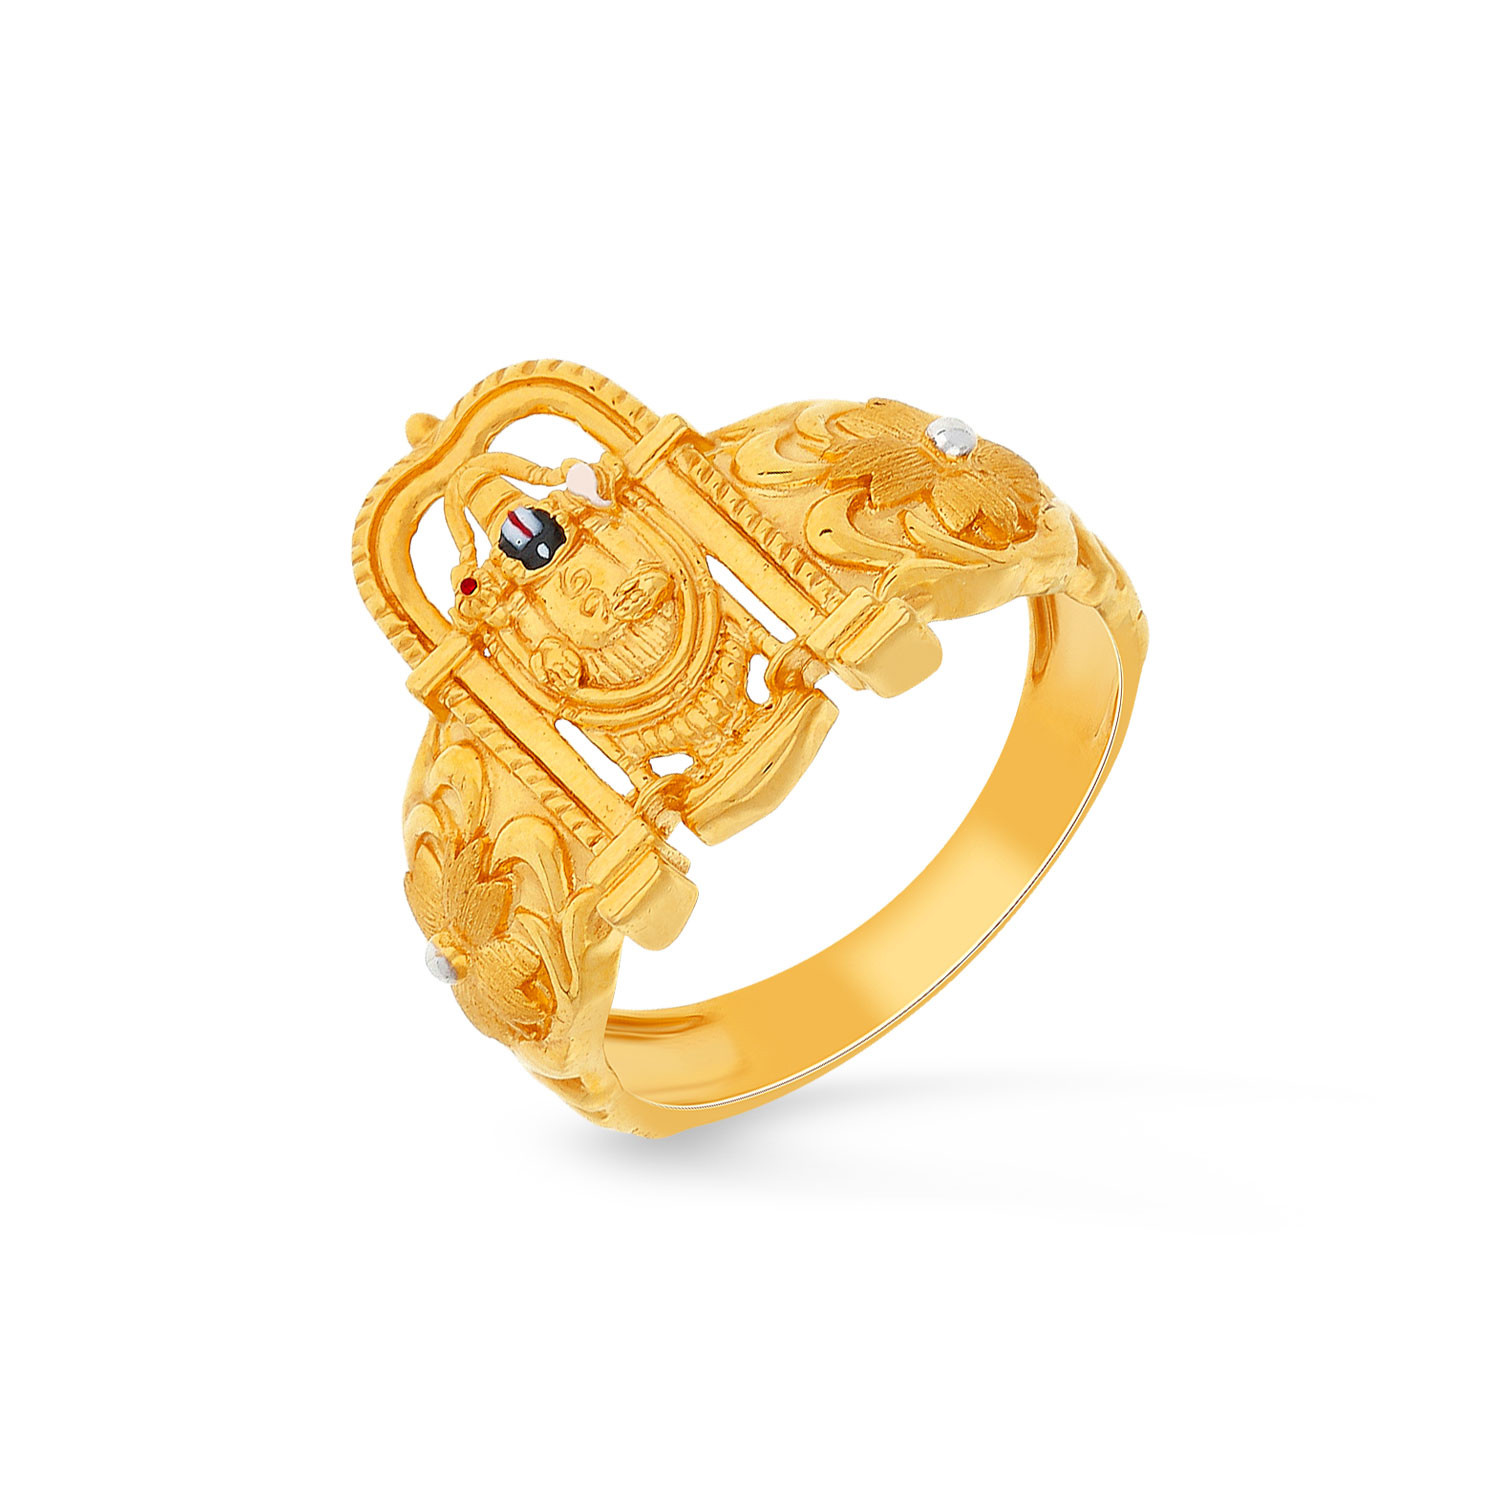 Malabar Gold Ring Designs with Price | Gold ring designs, Ring designs,  Gold rings